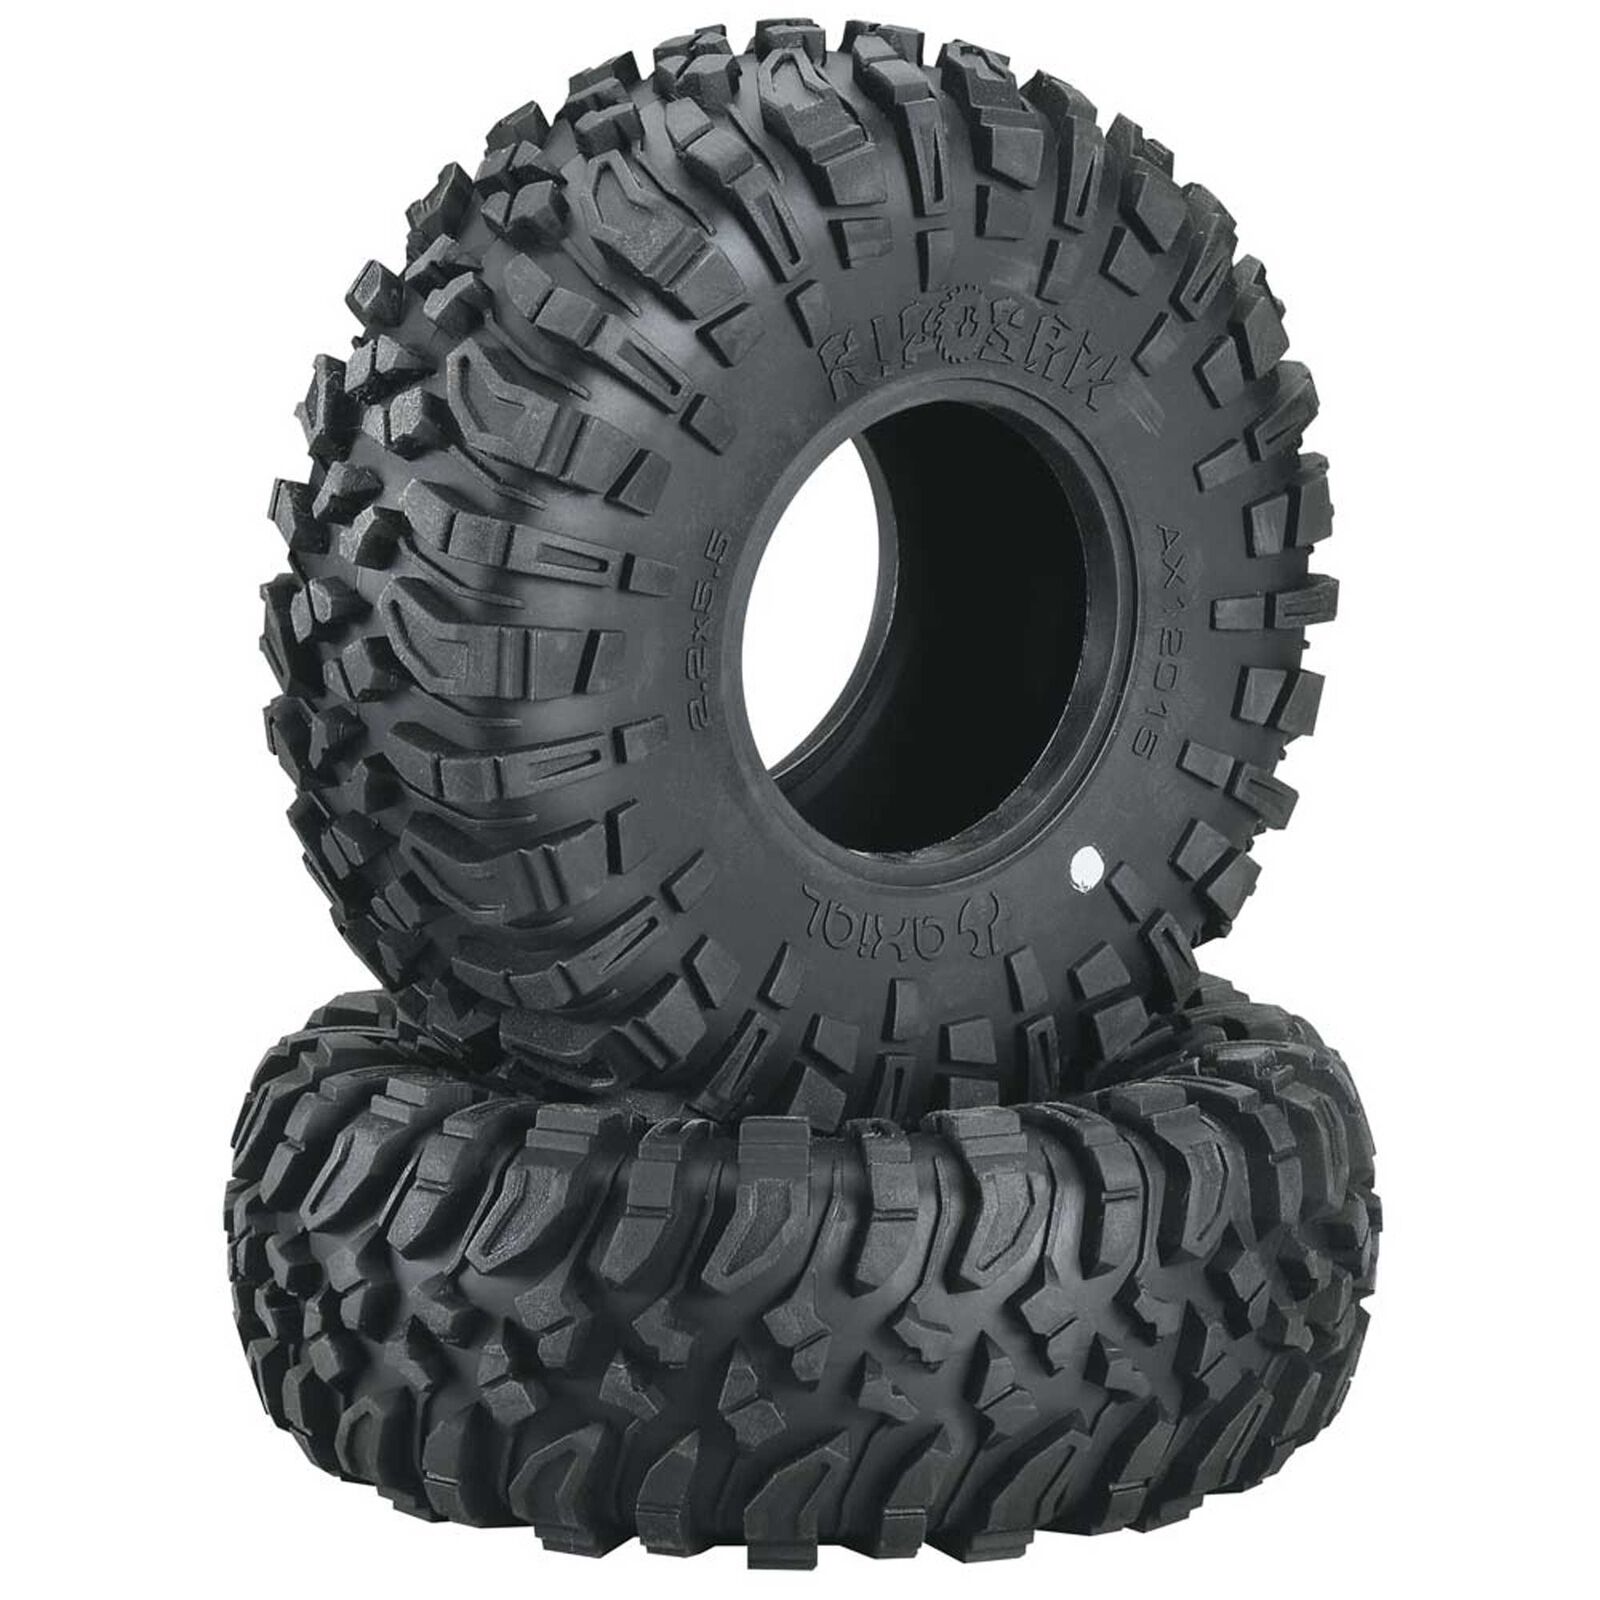 1/10 Ripsaw X Compound 2.2 Tire with Inserts (2)